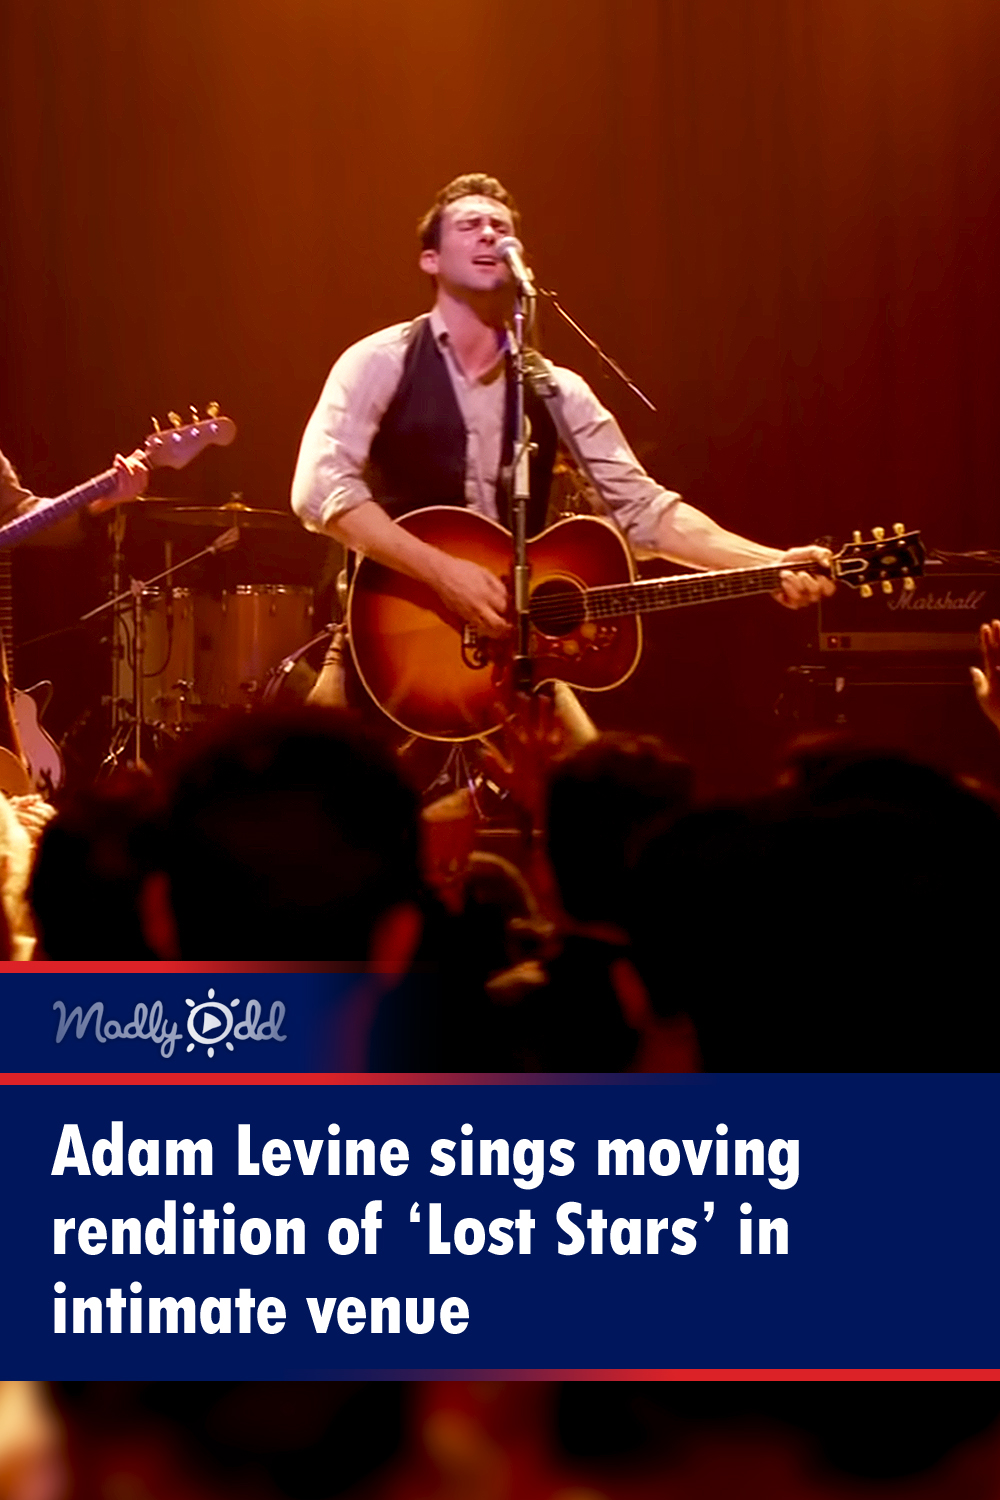 Adam Levine sings moving rendition of ‘Lost Stars’ in intimate venue